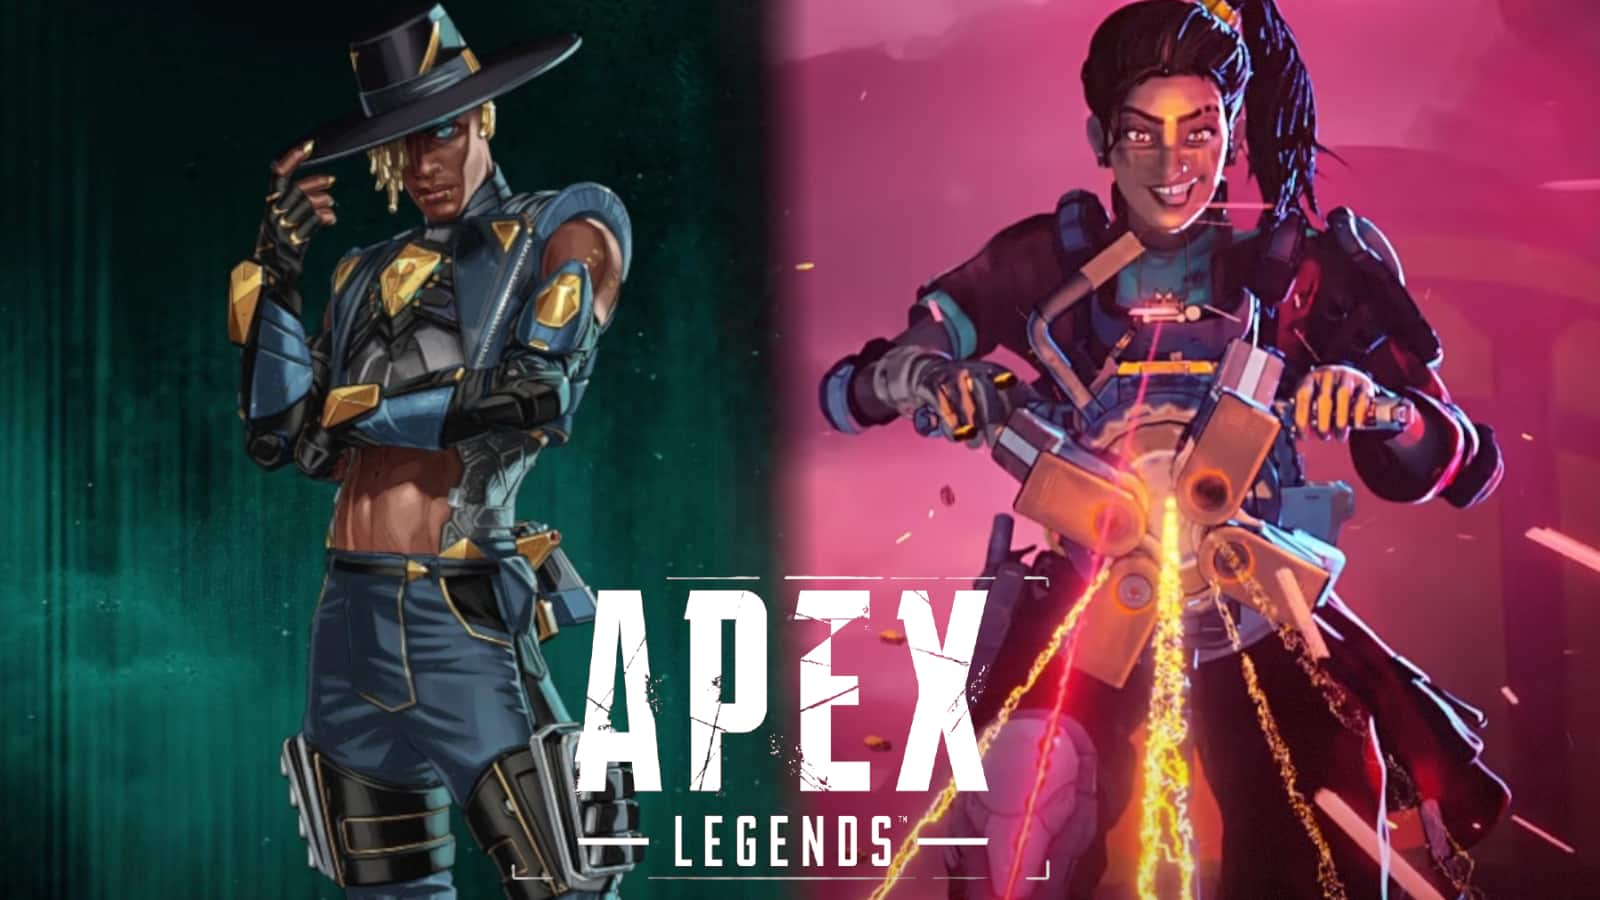 So why is revs picture glitching all of the sudden? #gamergirl #apexle